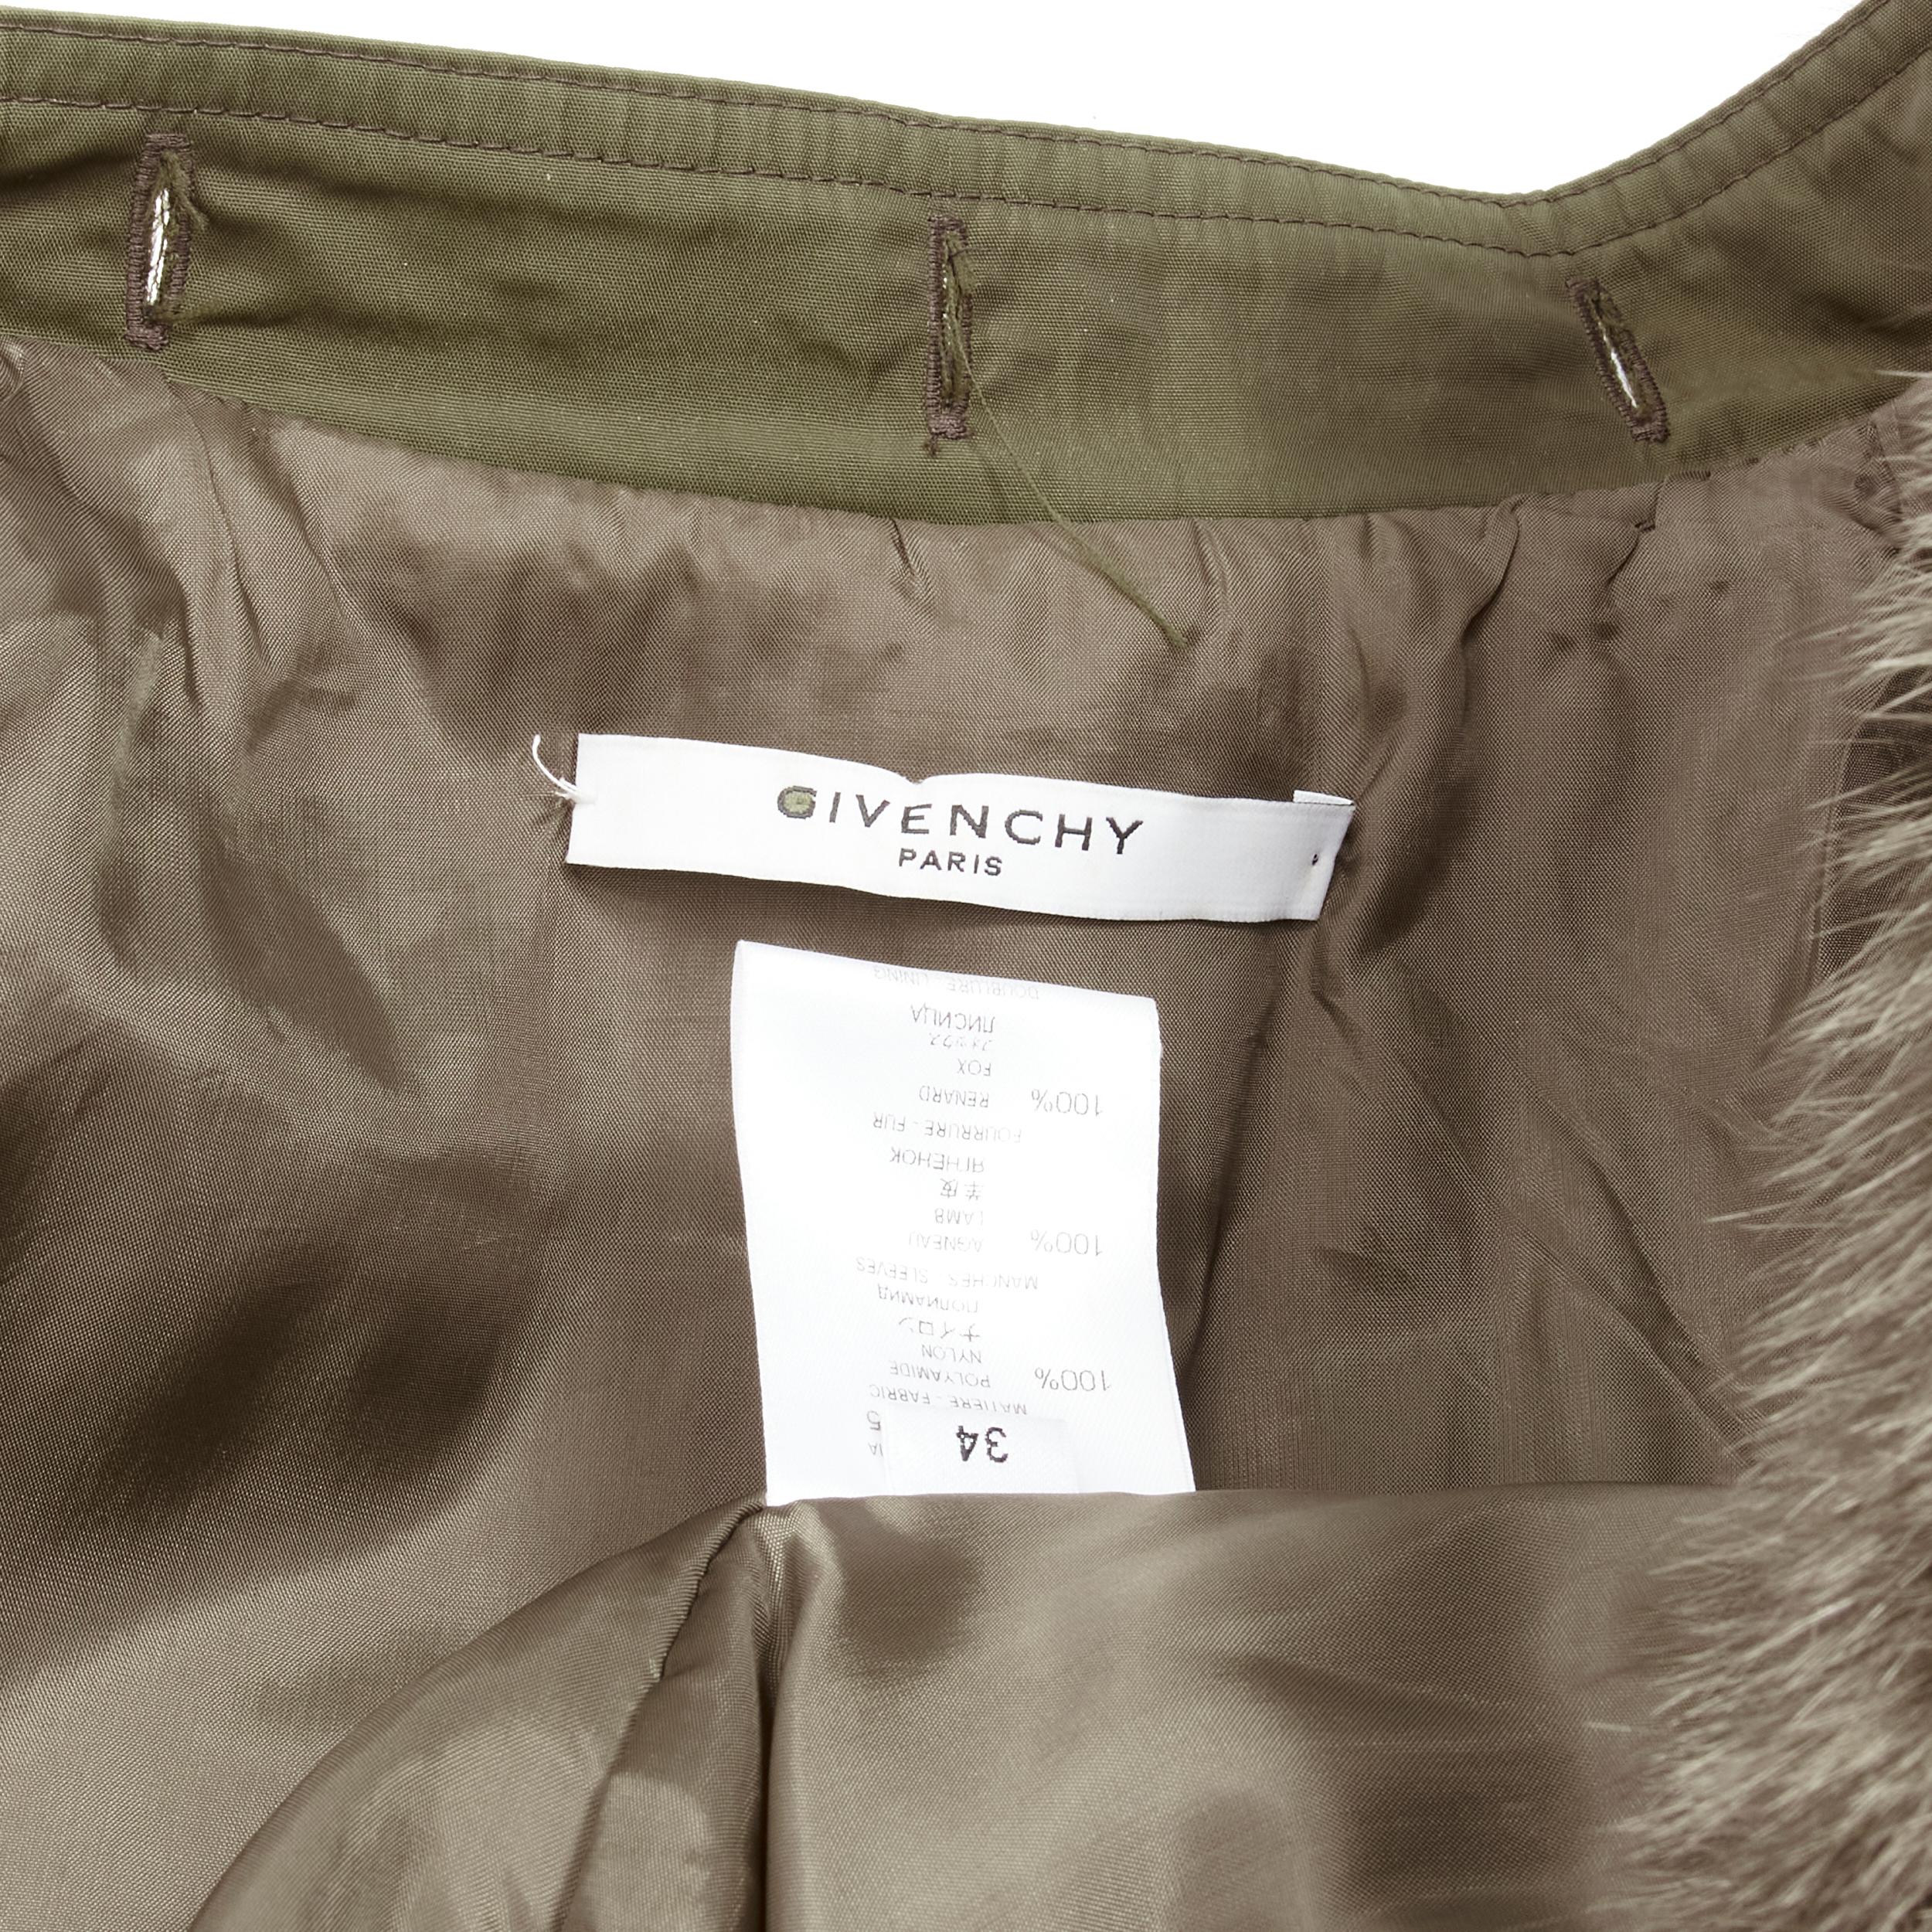 GIVENCHY Riccardo Tisci green leather sleeve fox fur anorak coat FR34 XS For Sale 4